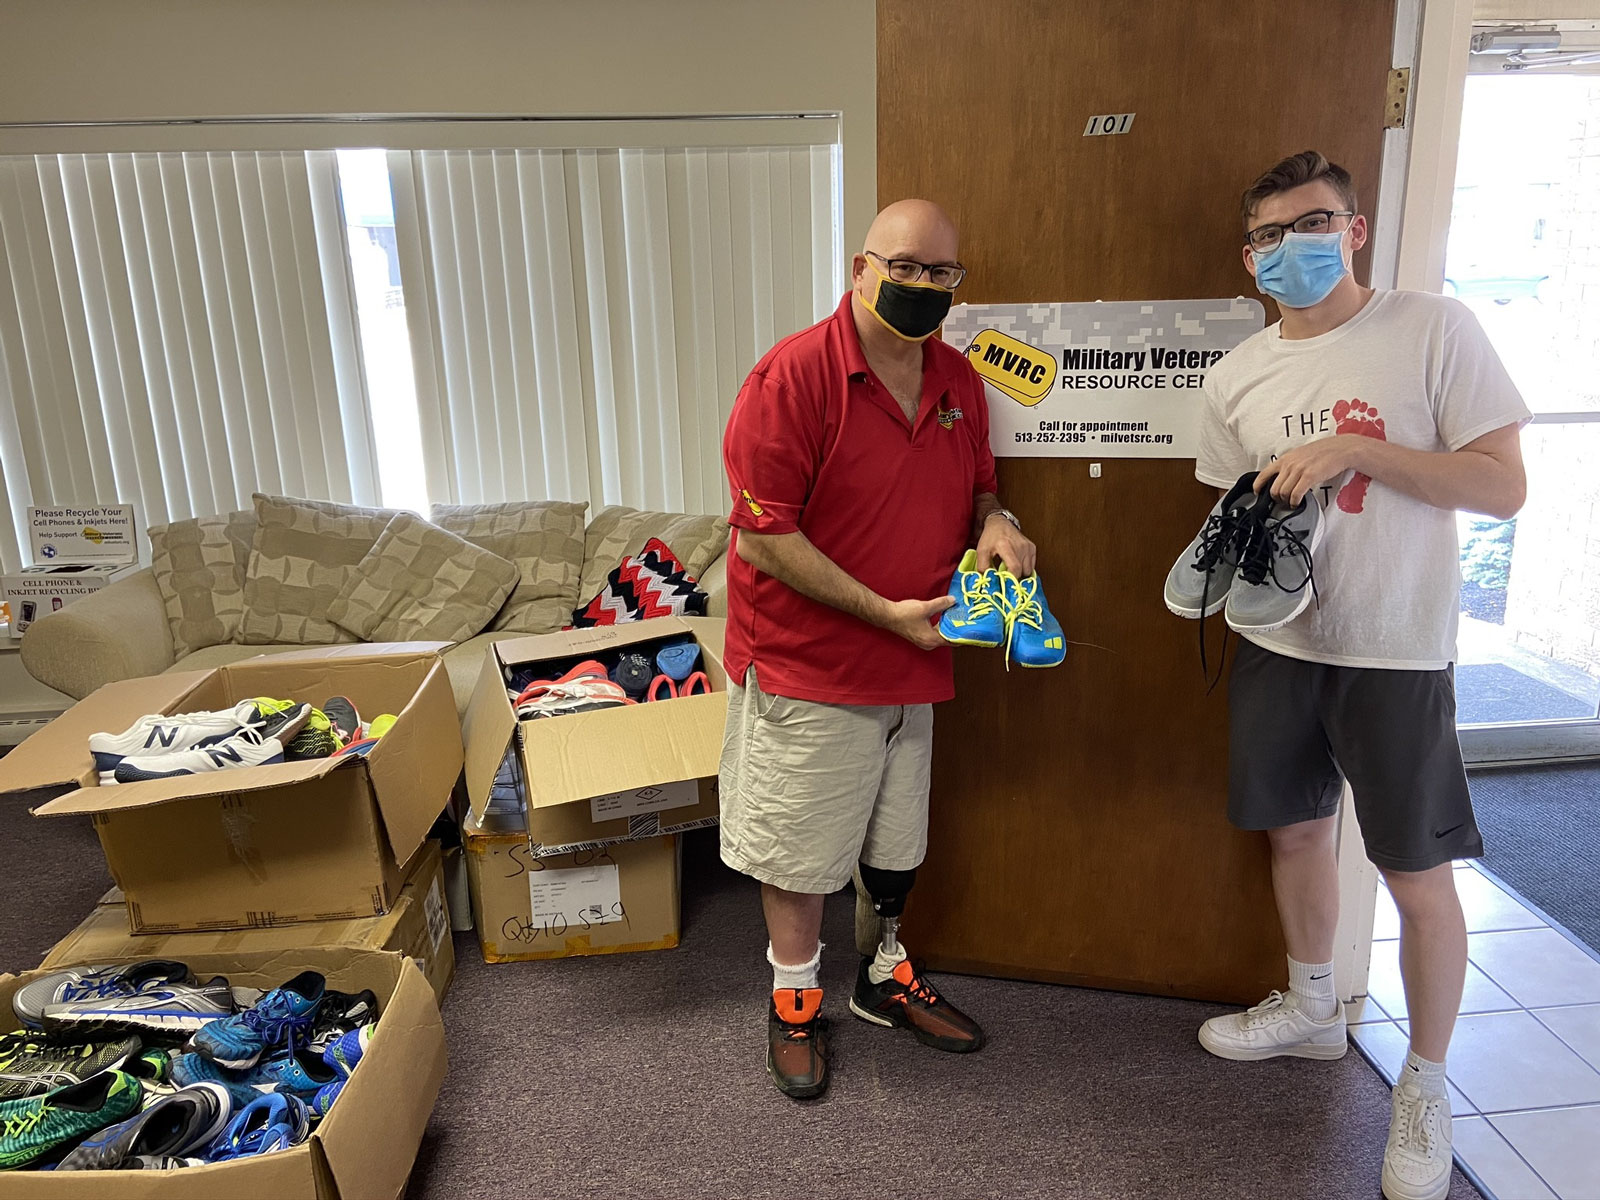 Delivering shoes to military veterans resource center